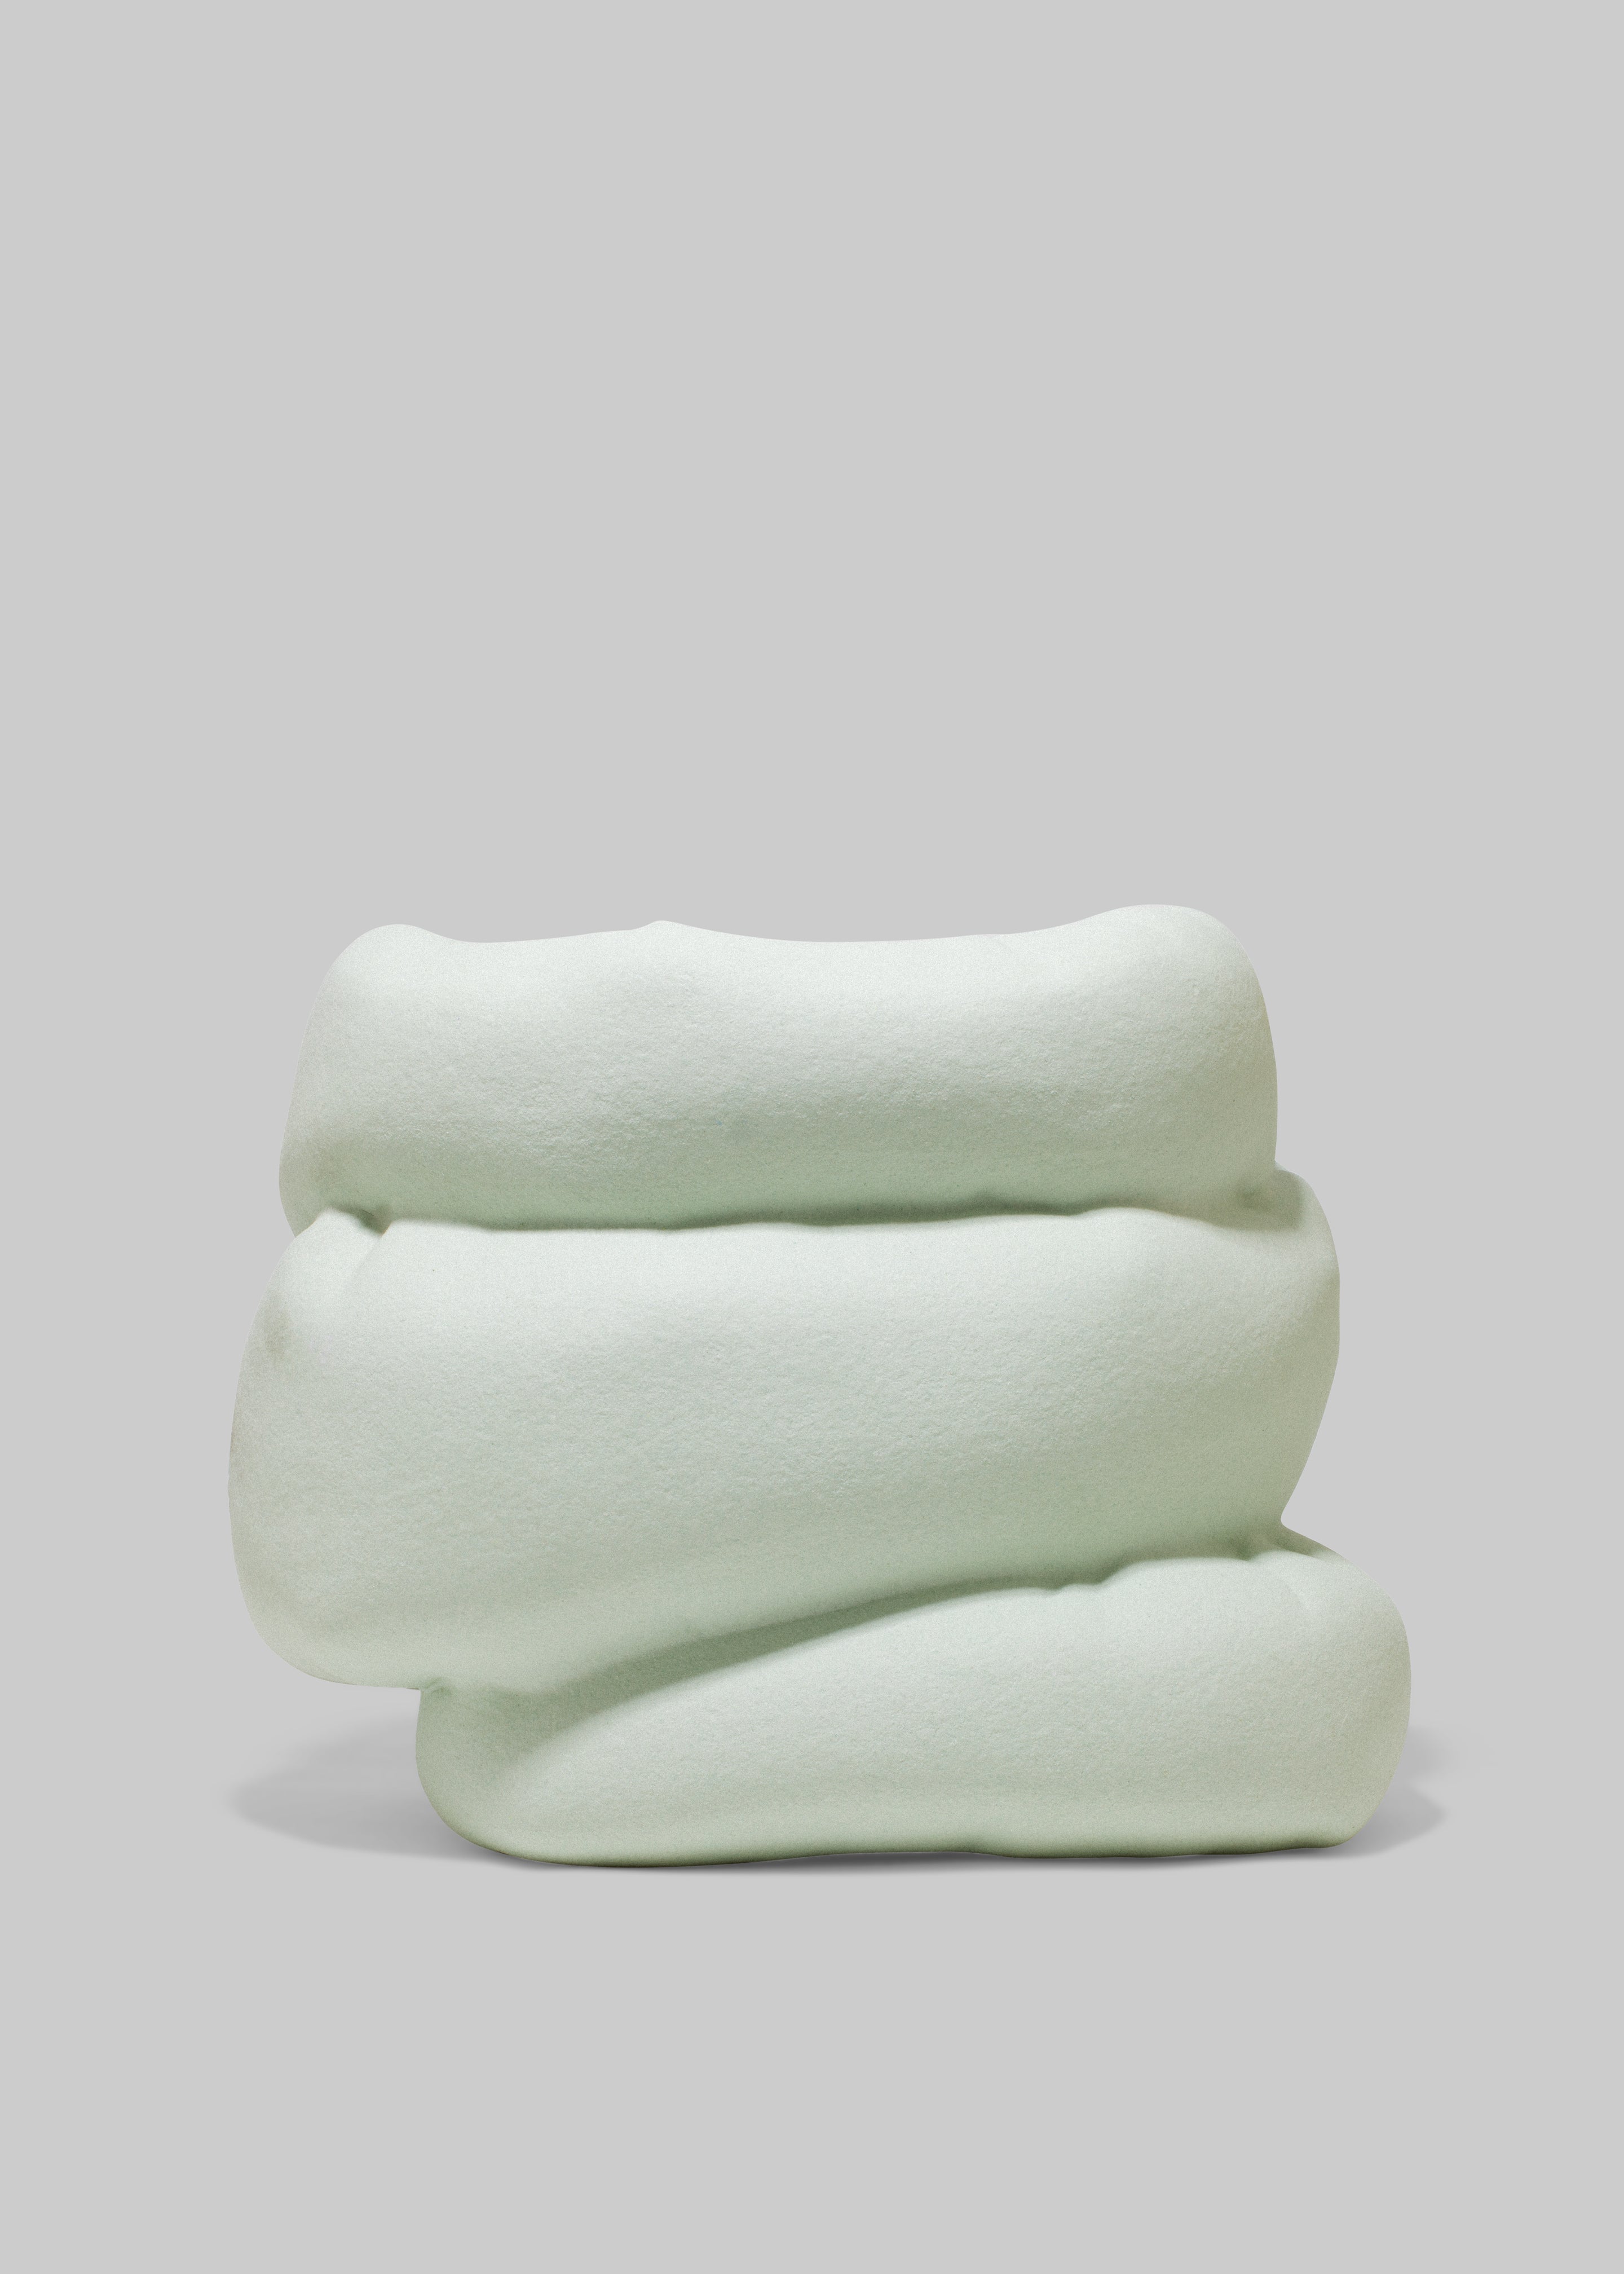 Completedworks Inflated Large Vessel - Textured Mint - 1